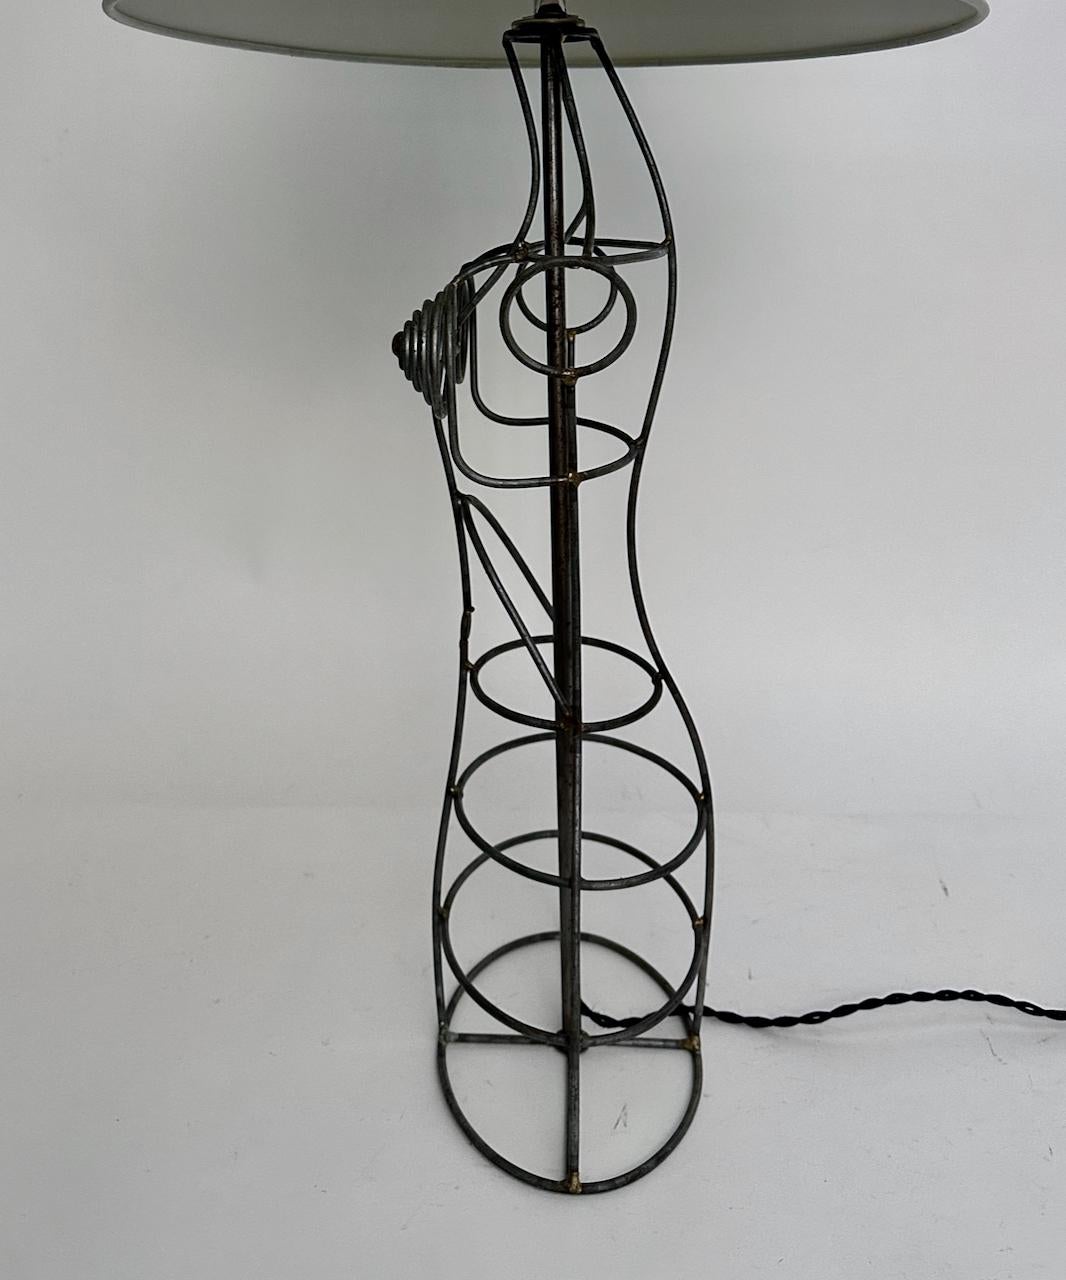 Modern French Welded Steel Wire Dress Form Table Lamp, C. 1970 For Sale